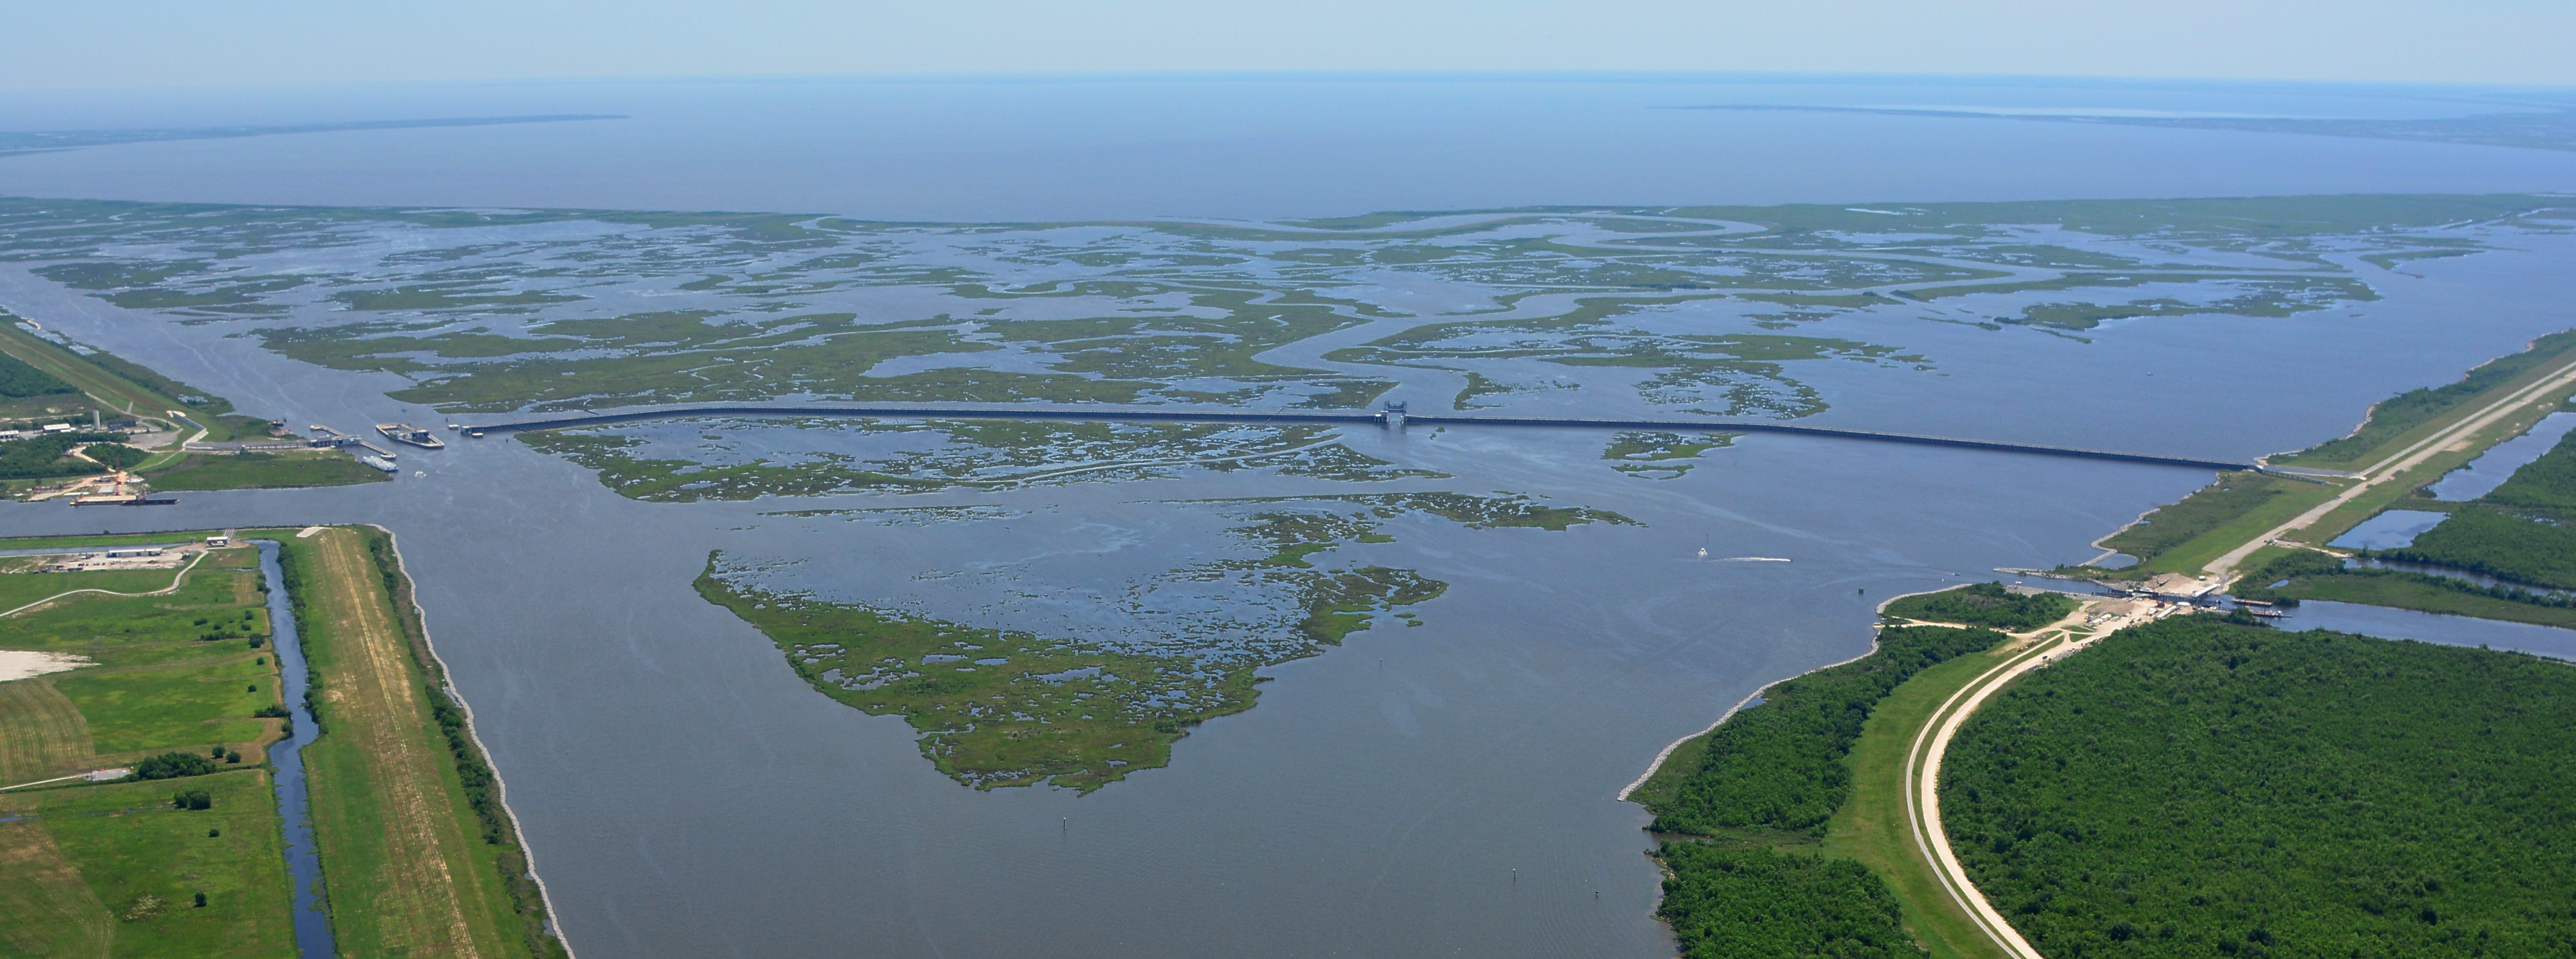 A storm surge barrier in Louisiana, which closed the Gulf Outlet shipping canal in 2010. Gulf of Mexico in the distance. Photo credit: US Army Corps of Engineers.